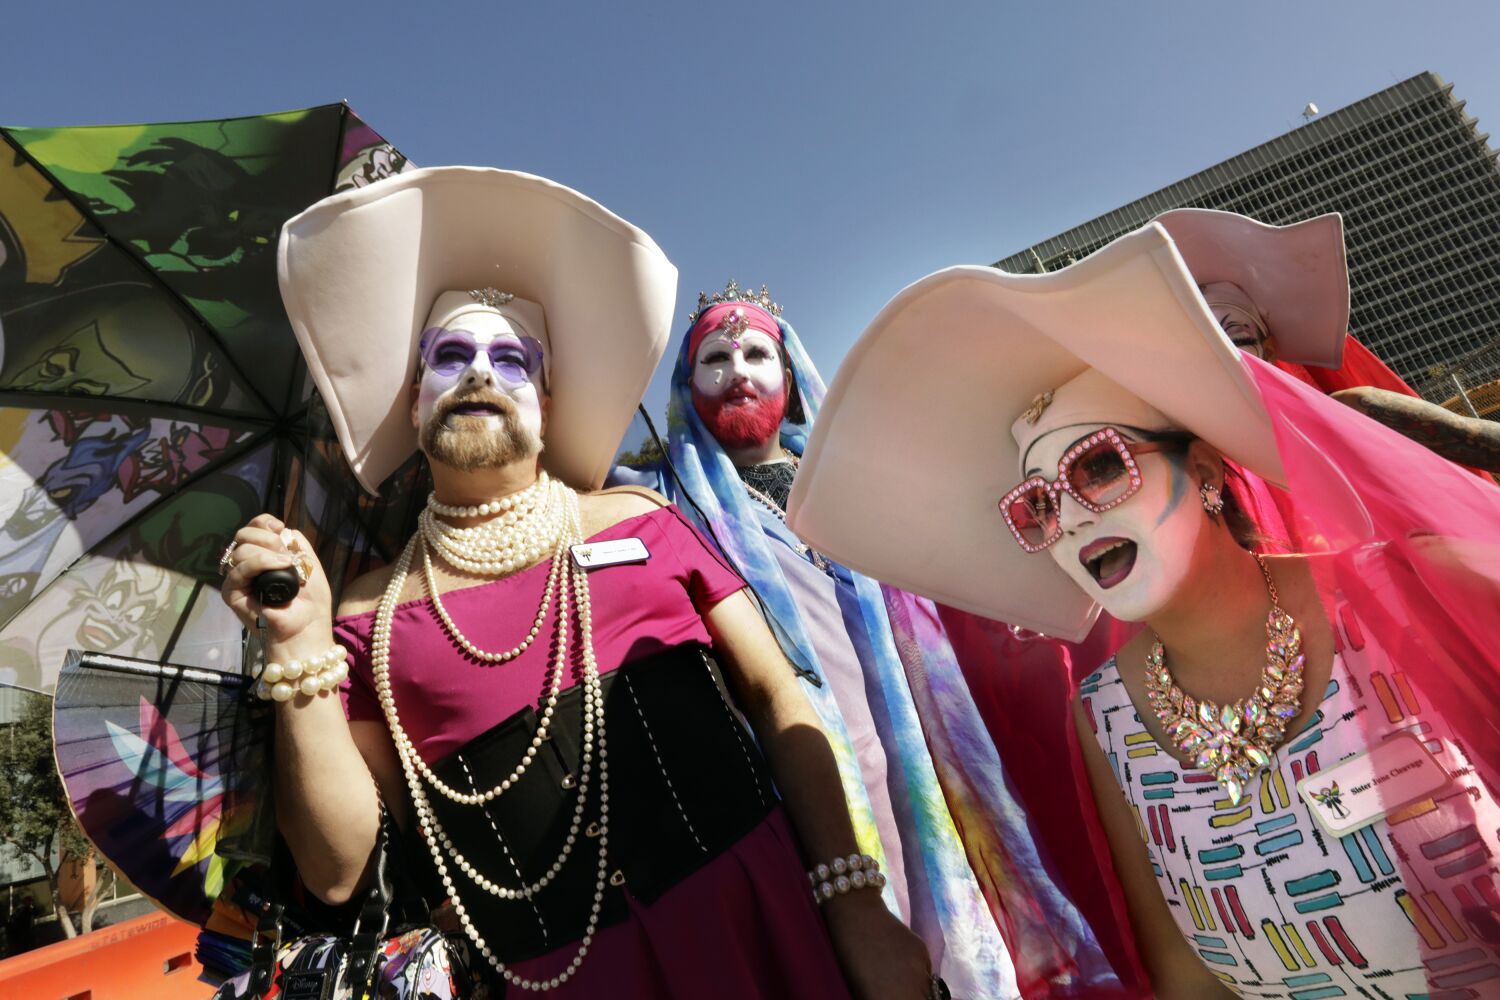 California's plan to honor drag activist sets off another Sister controversy